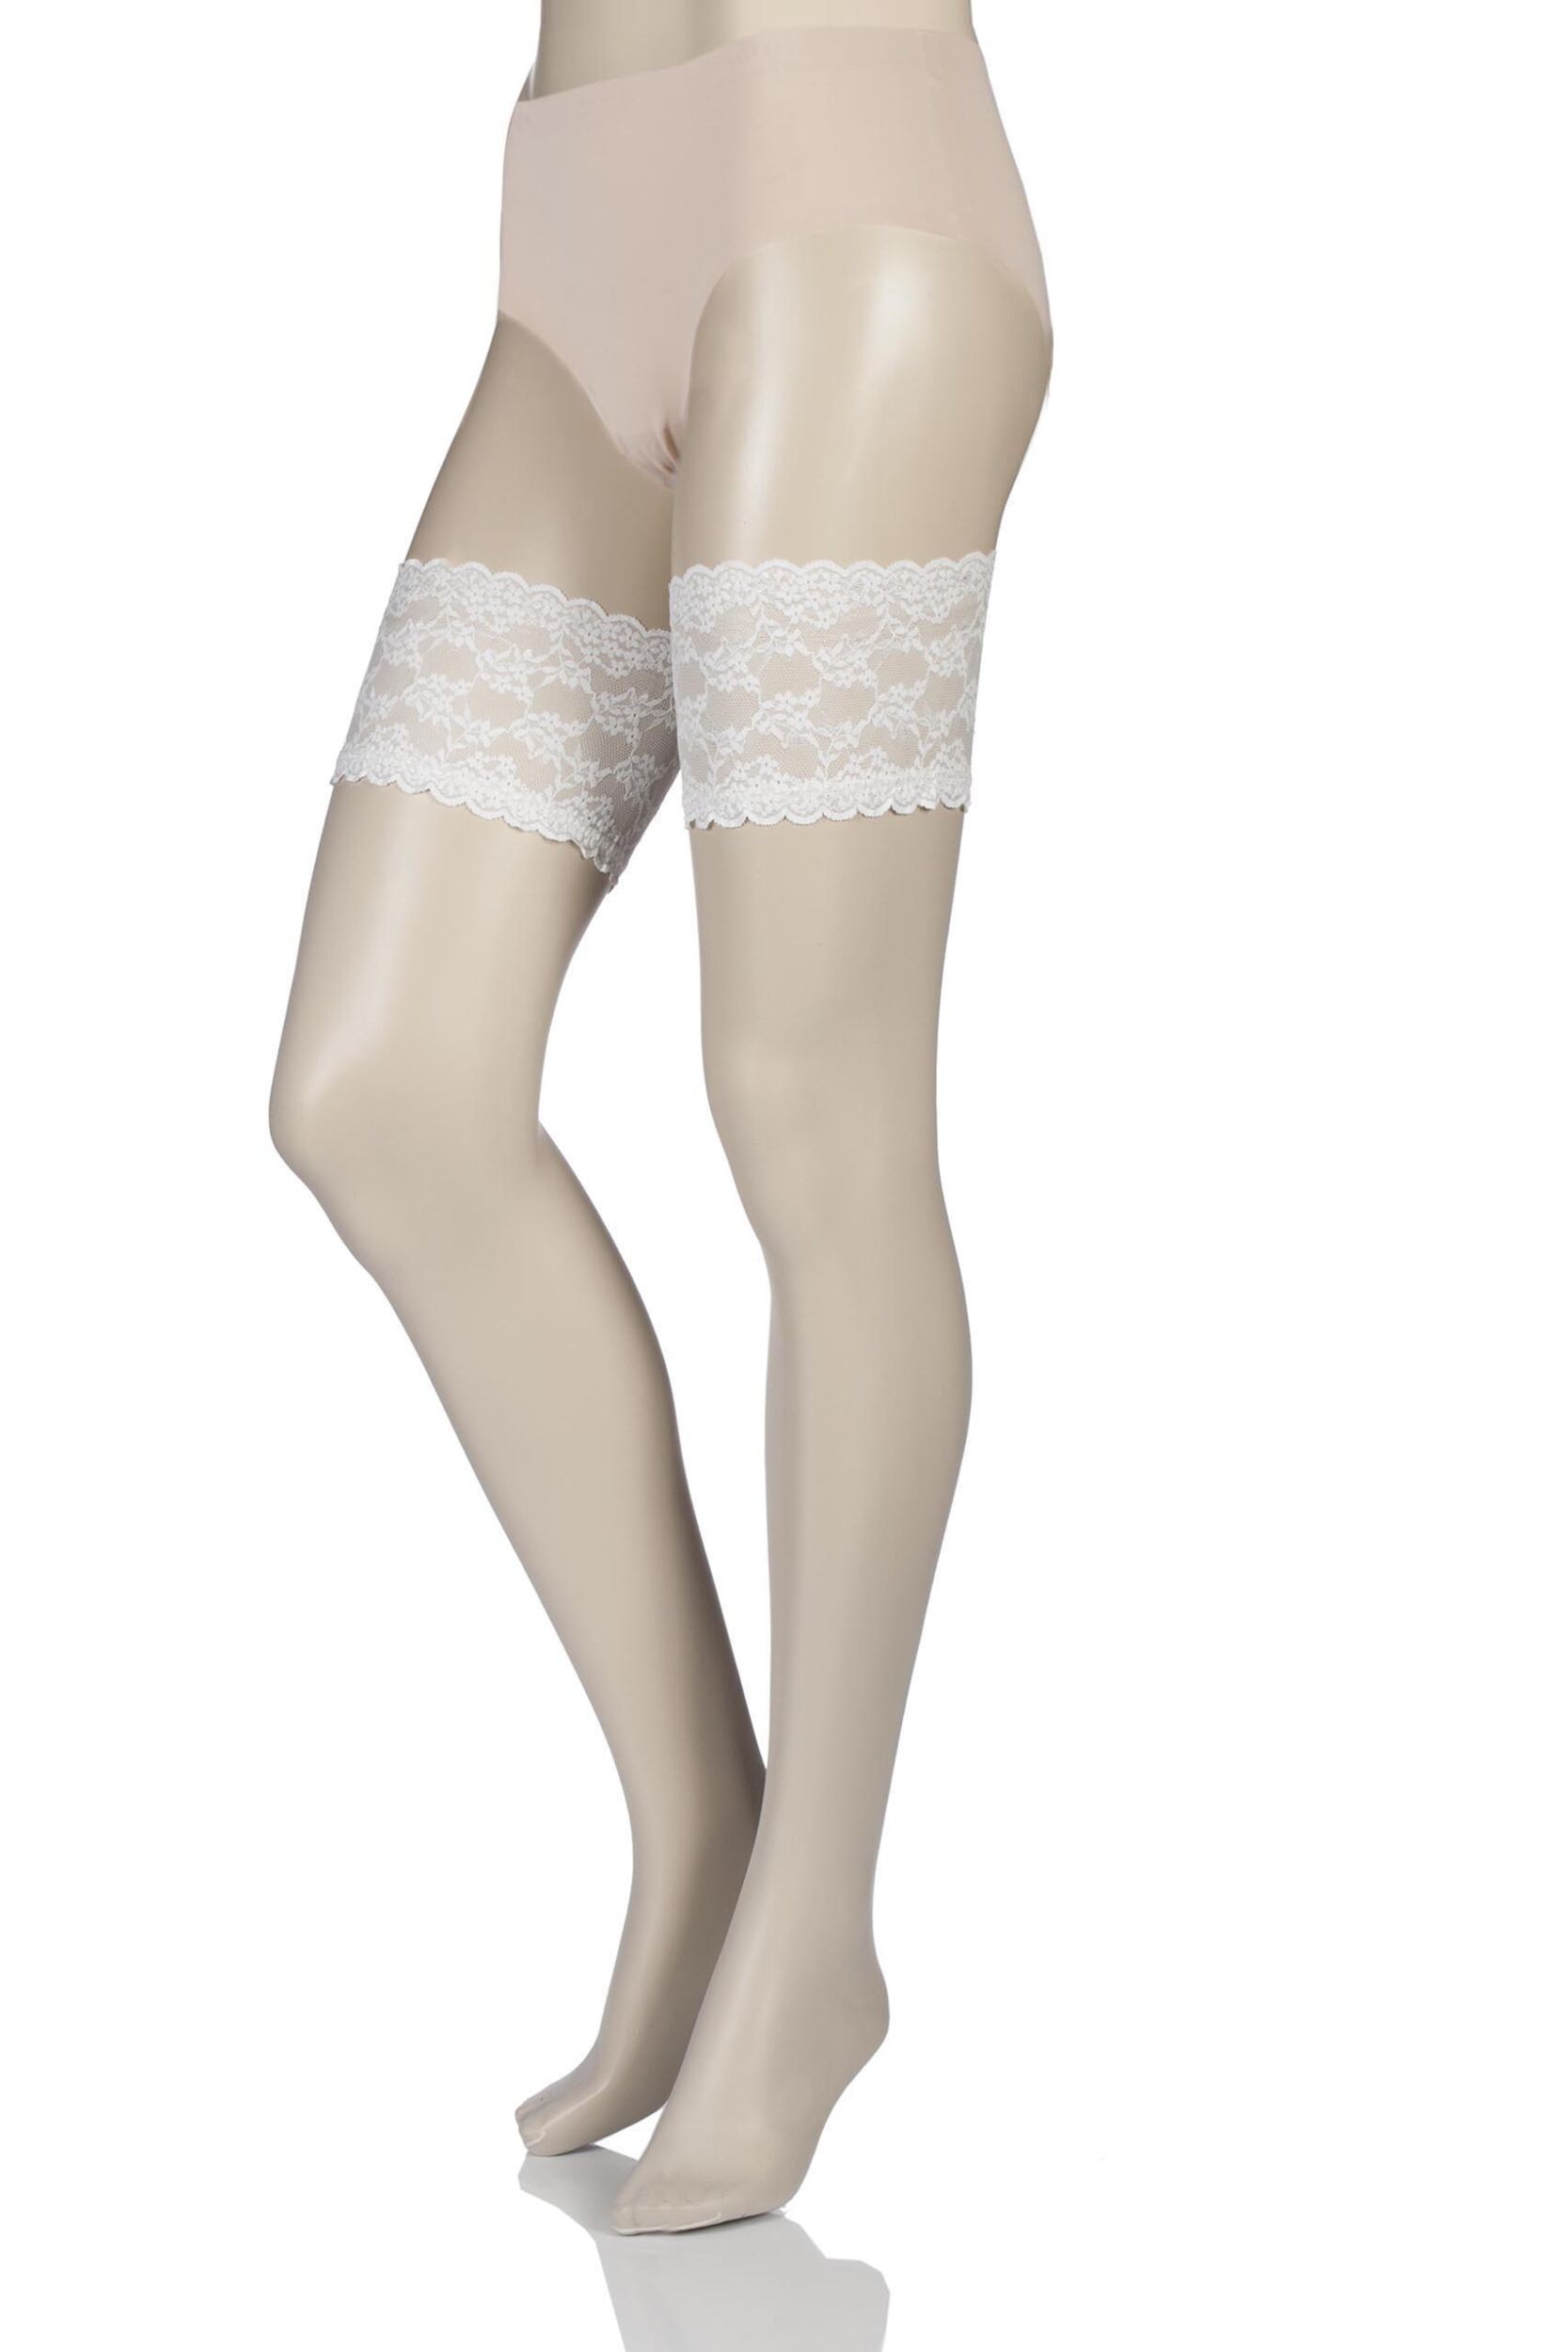 1 Pair Champagne 10 Denier Bridal Lace Top Hold Ups Ladies Small - Charnos